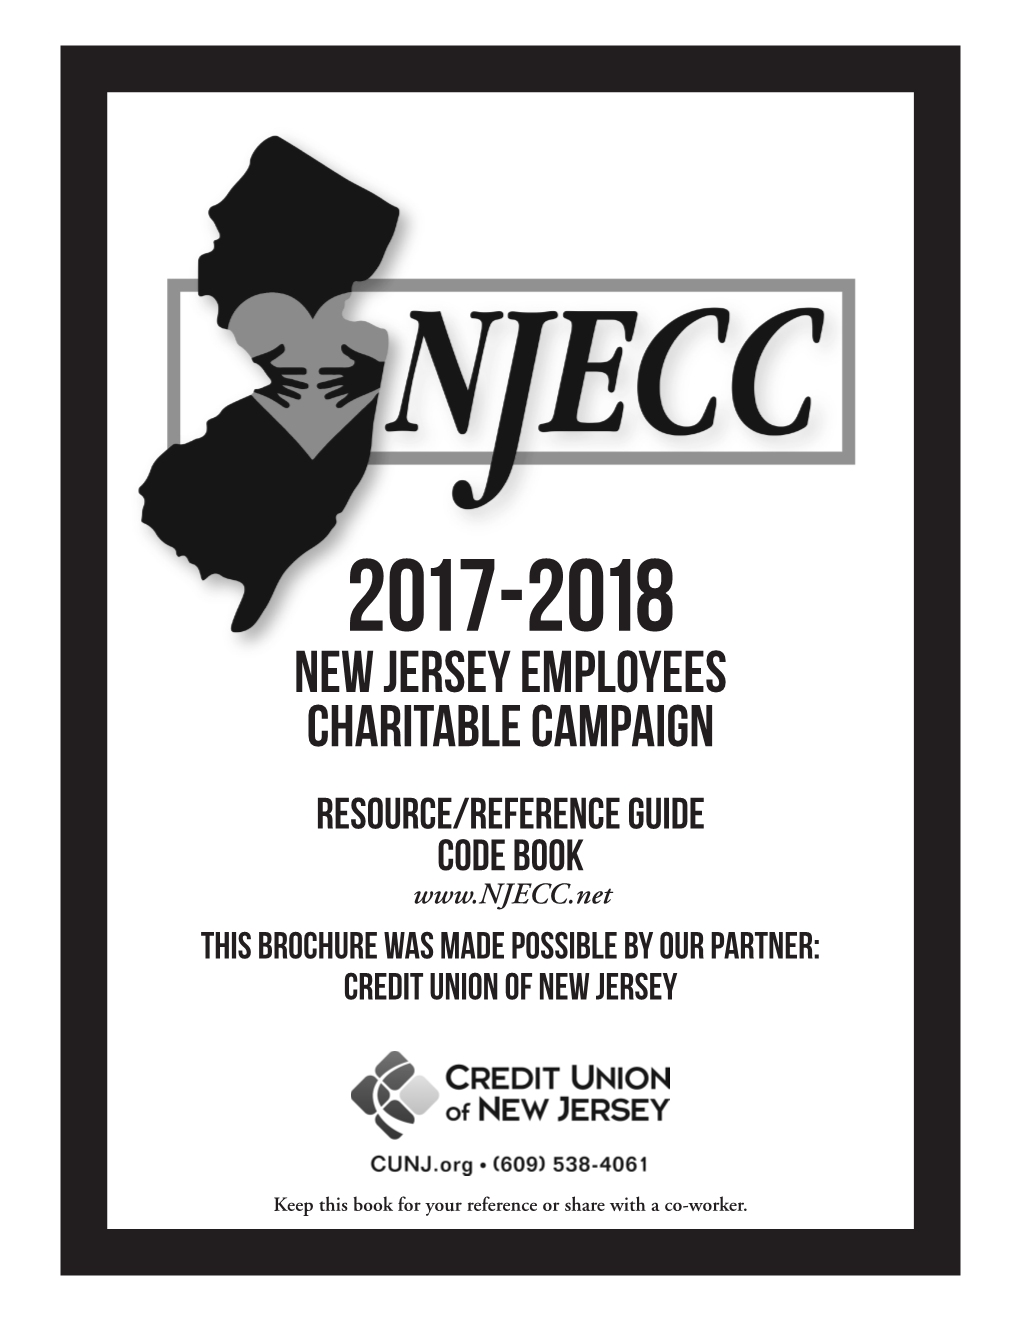 NEW JERSEY EMPLOYEES CHARITABLE CAMPAIGN RESOURCE/REFERENCE GUIDE CODE BOOK This Brochure Was Made Possible by Our Partner: Credit Union of New Jersey